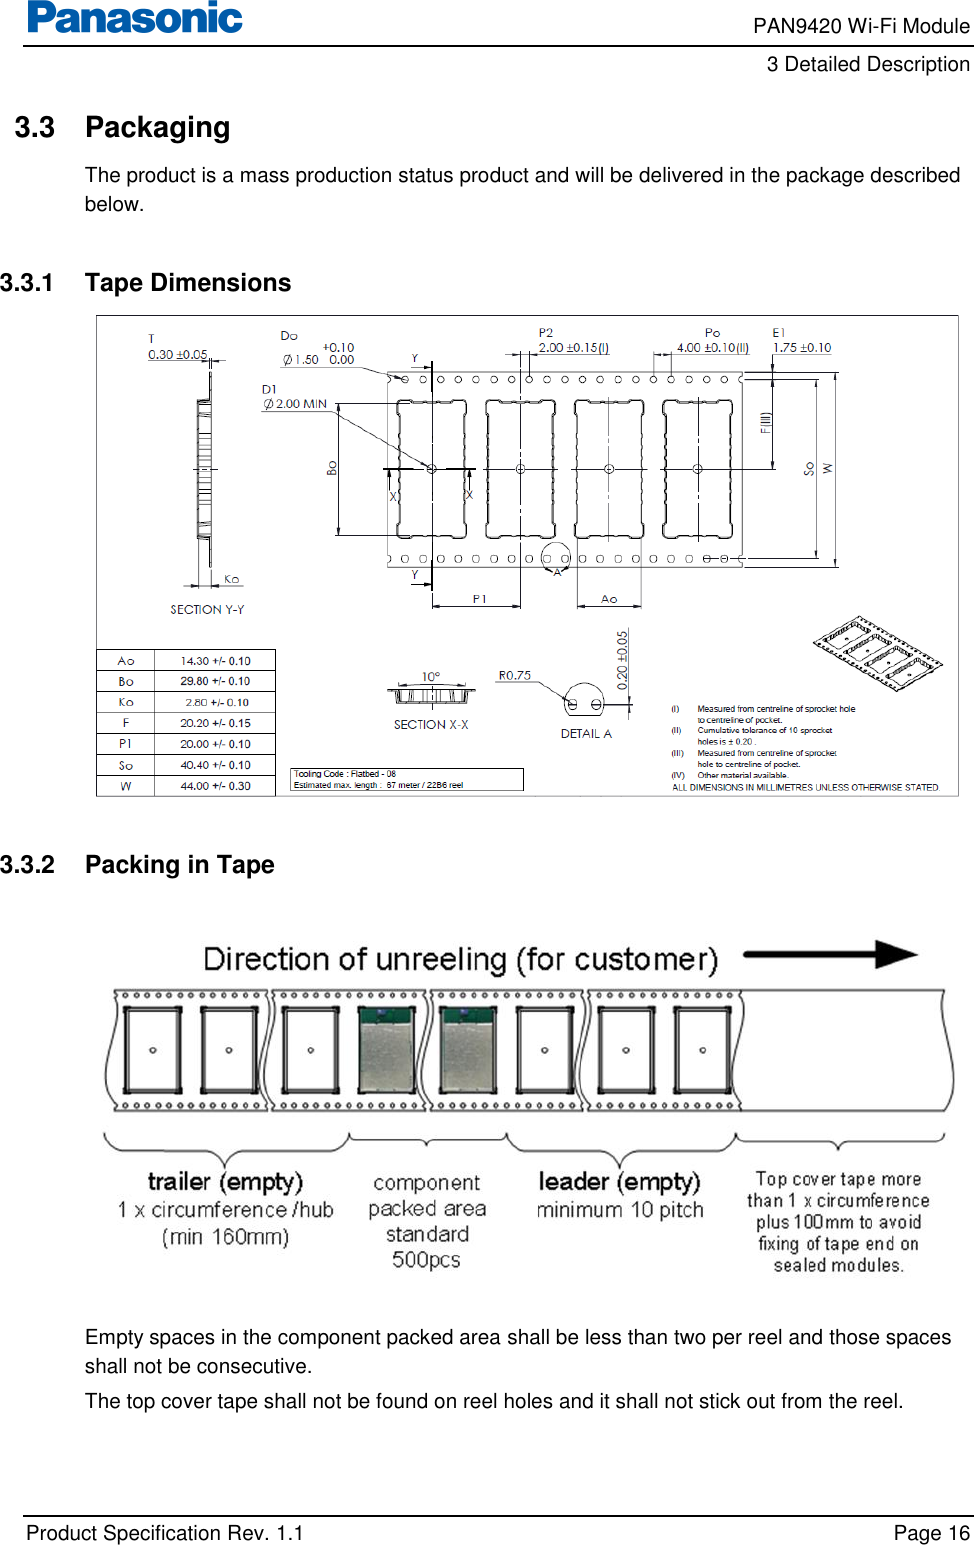     PAN9420 Wi-Fi Module         3 Detailed Description    Product Specification Rev. 1.1    Page 16  3.3  Packaging The product is a mass production status product and will be delivered in the package described below.  3.3.1  Tape Dimensions   3.3.2  Packing in Tape    Empty spaces in the component packed area shall be less than two per reel and those spaces shall not be consecutive. The top cover tape shall not be found on reel holes and it shall not stick out from the reel. 